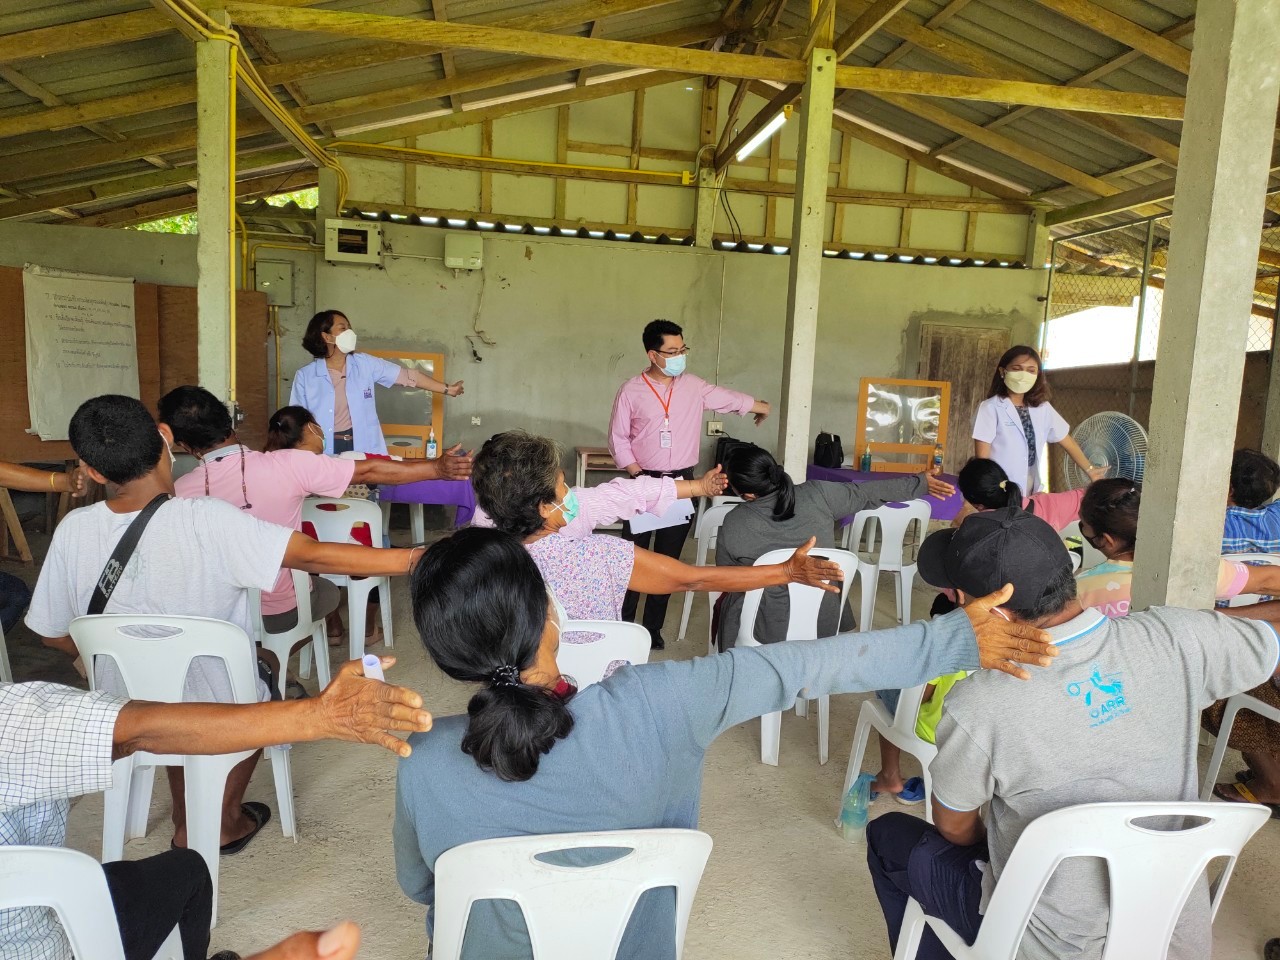 Walailak University Provides Healthcare Consulting Services to Empower the Potential of Swine Production and Local Economy for Swine Community Enterprise in Walailak Demonstration Community